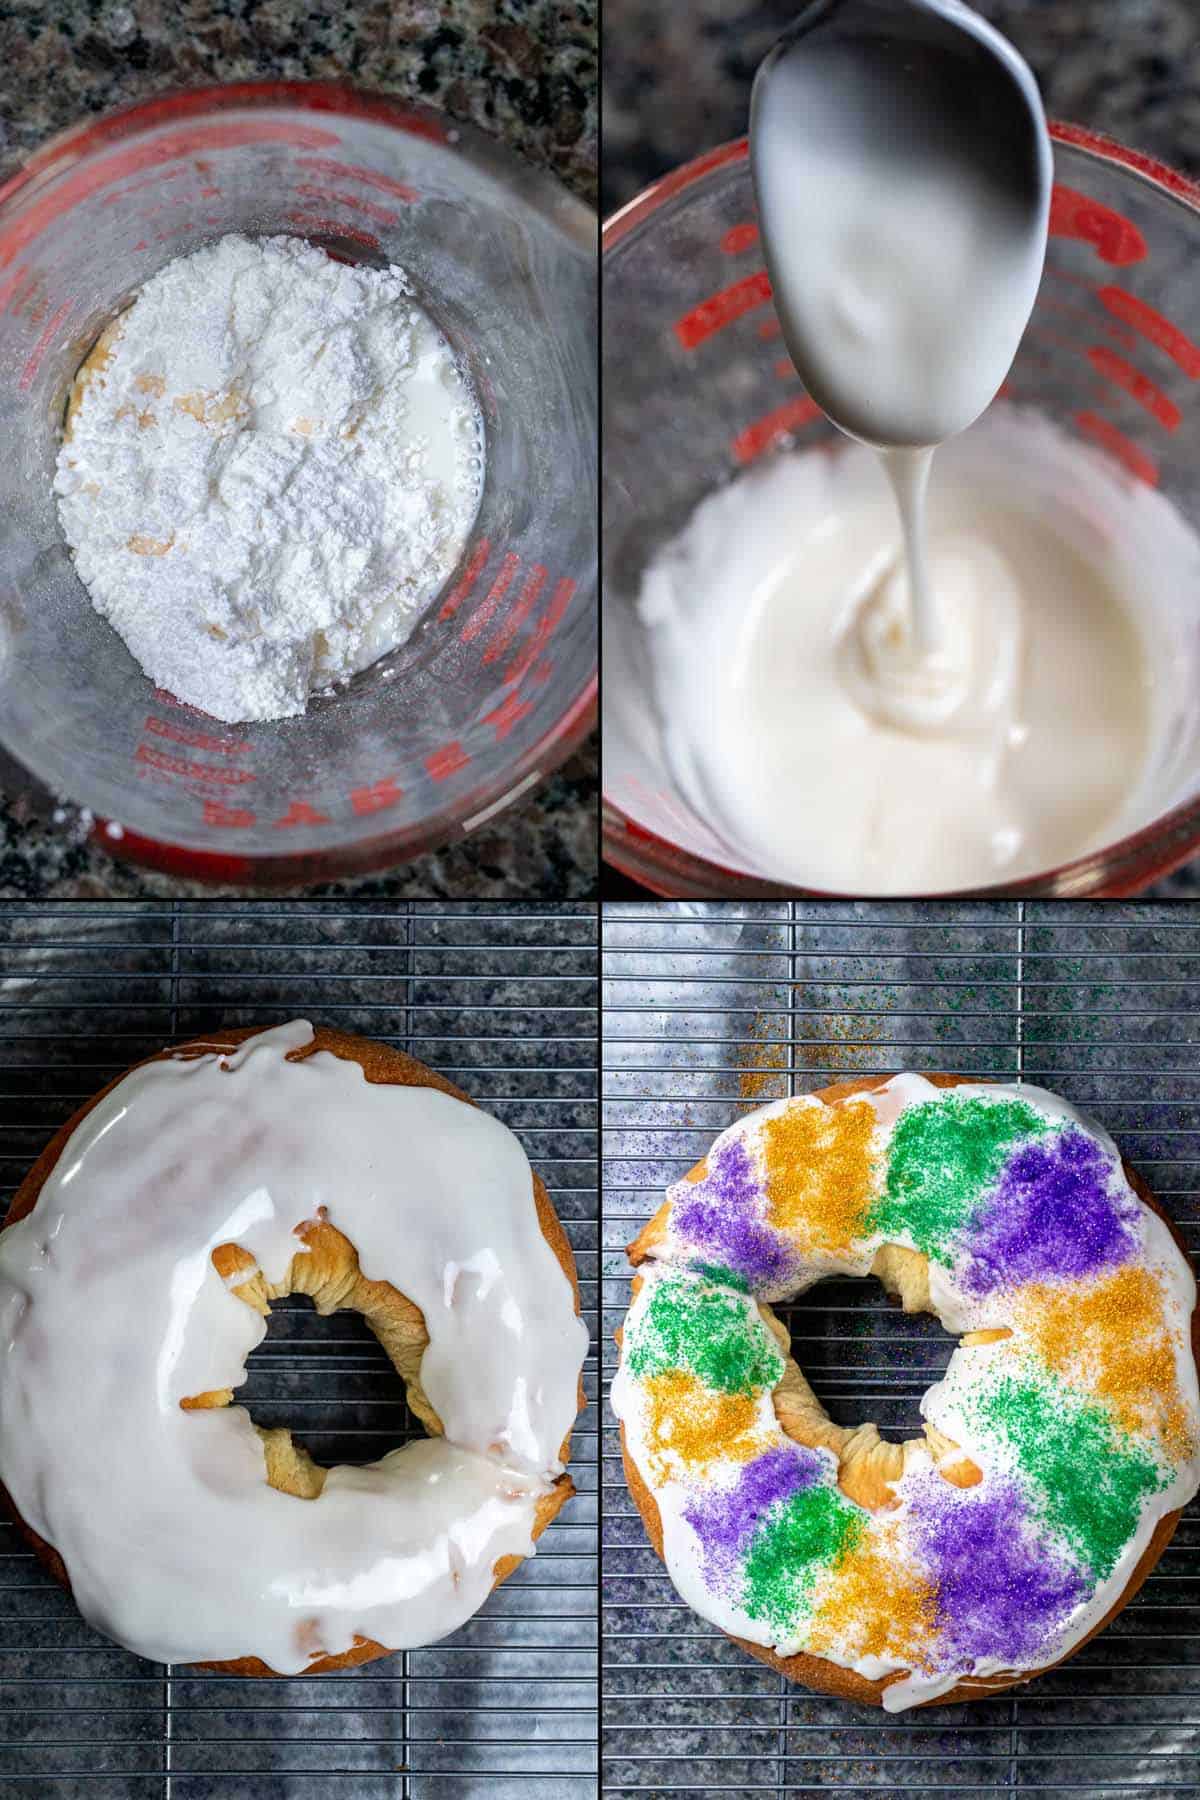 4 images showing the icing for king cake being made, poured over the cake, then decorated with purple, green, and gold sanding sugar.